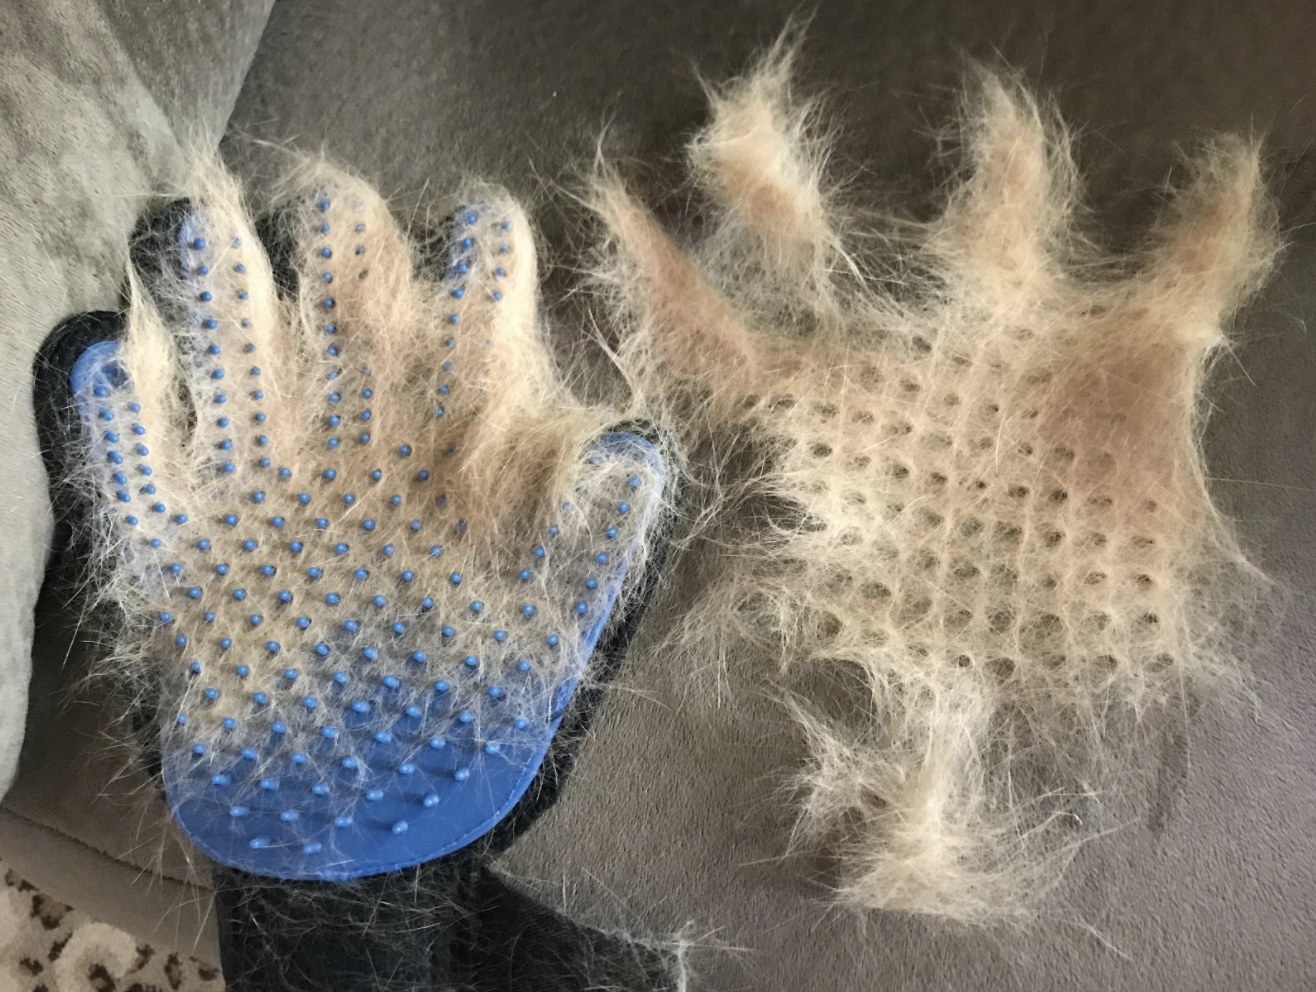 The grooming gloves with fur on it